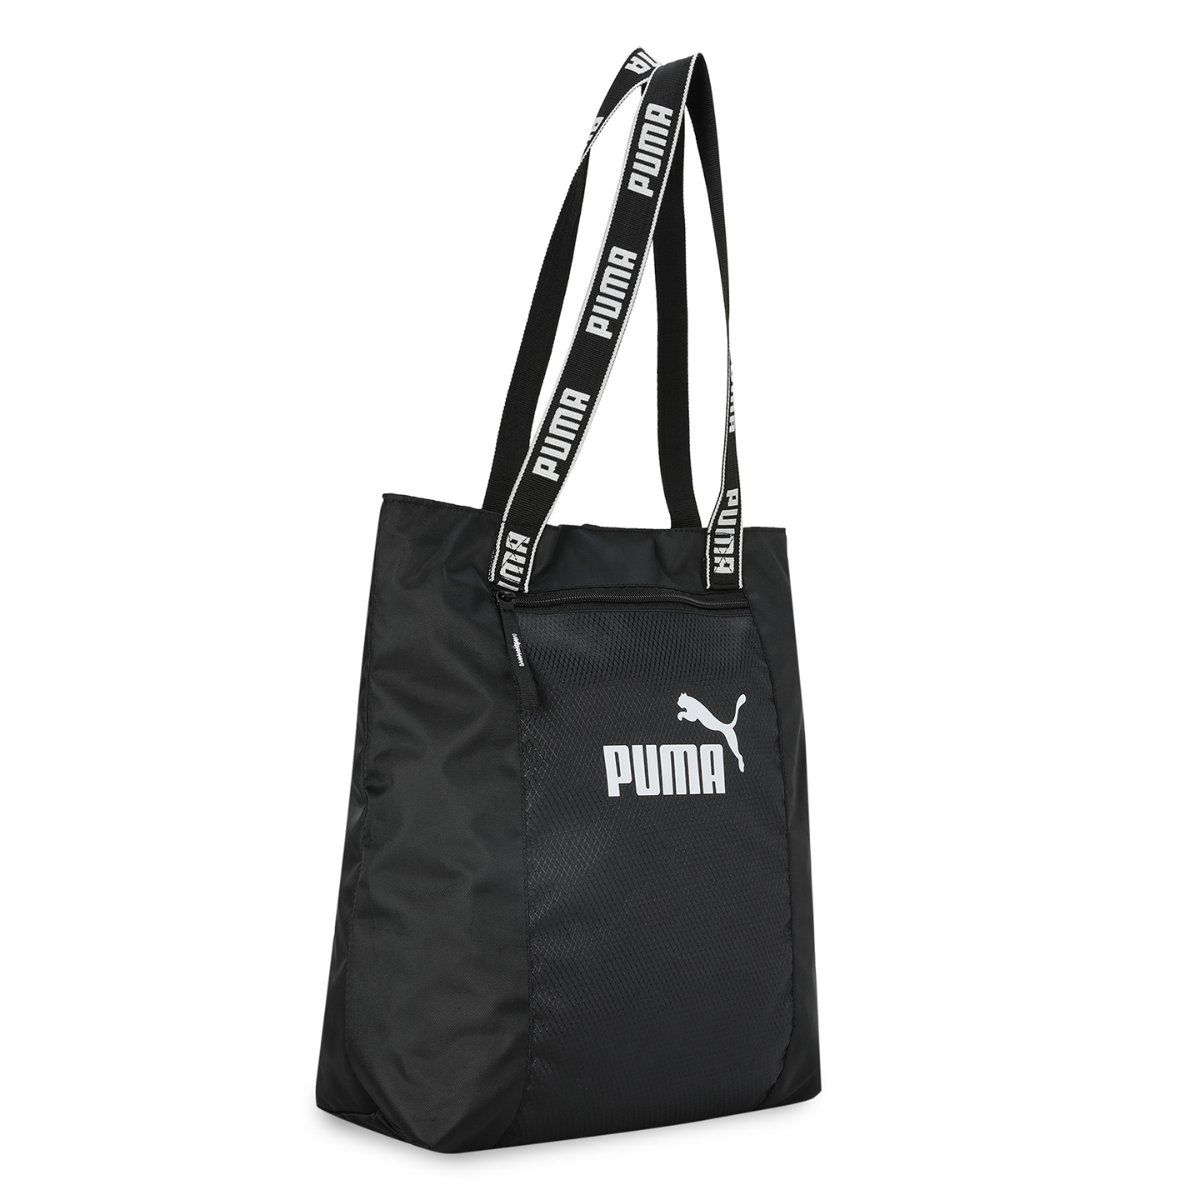 Buy puma bags Online in Cook Islands at Low Prices at desertcart